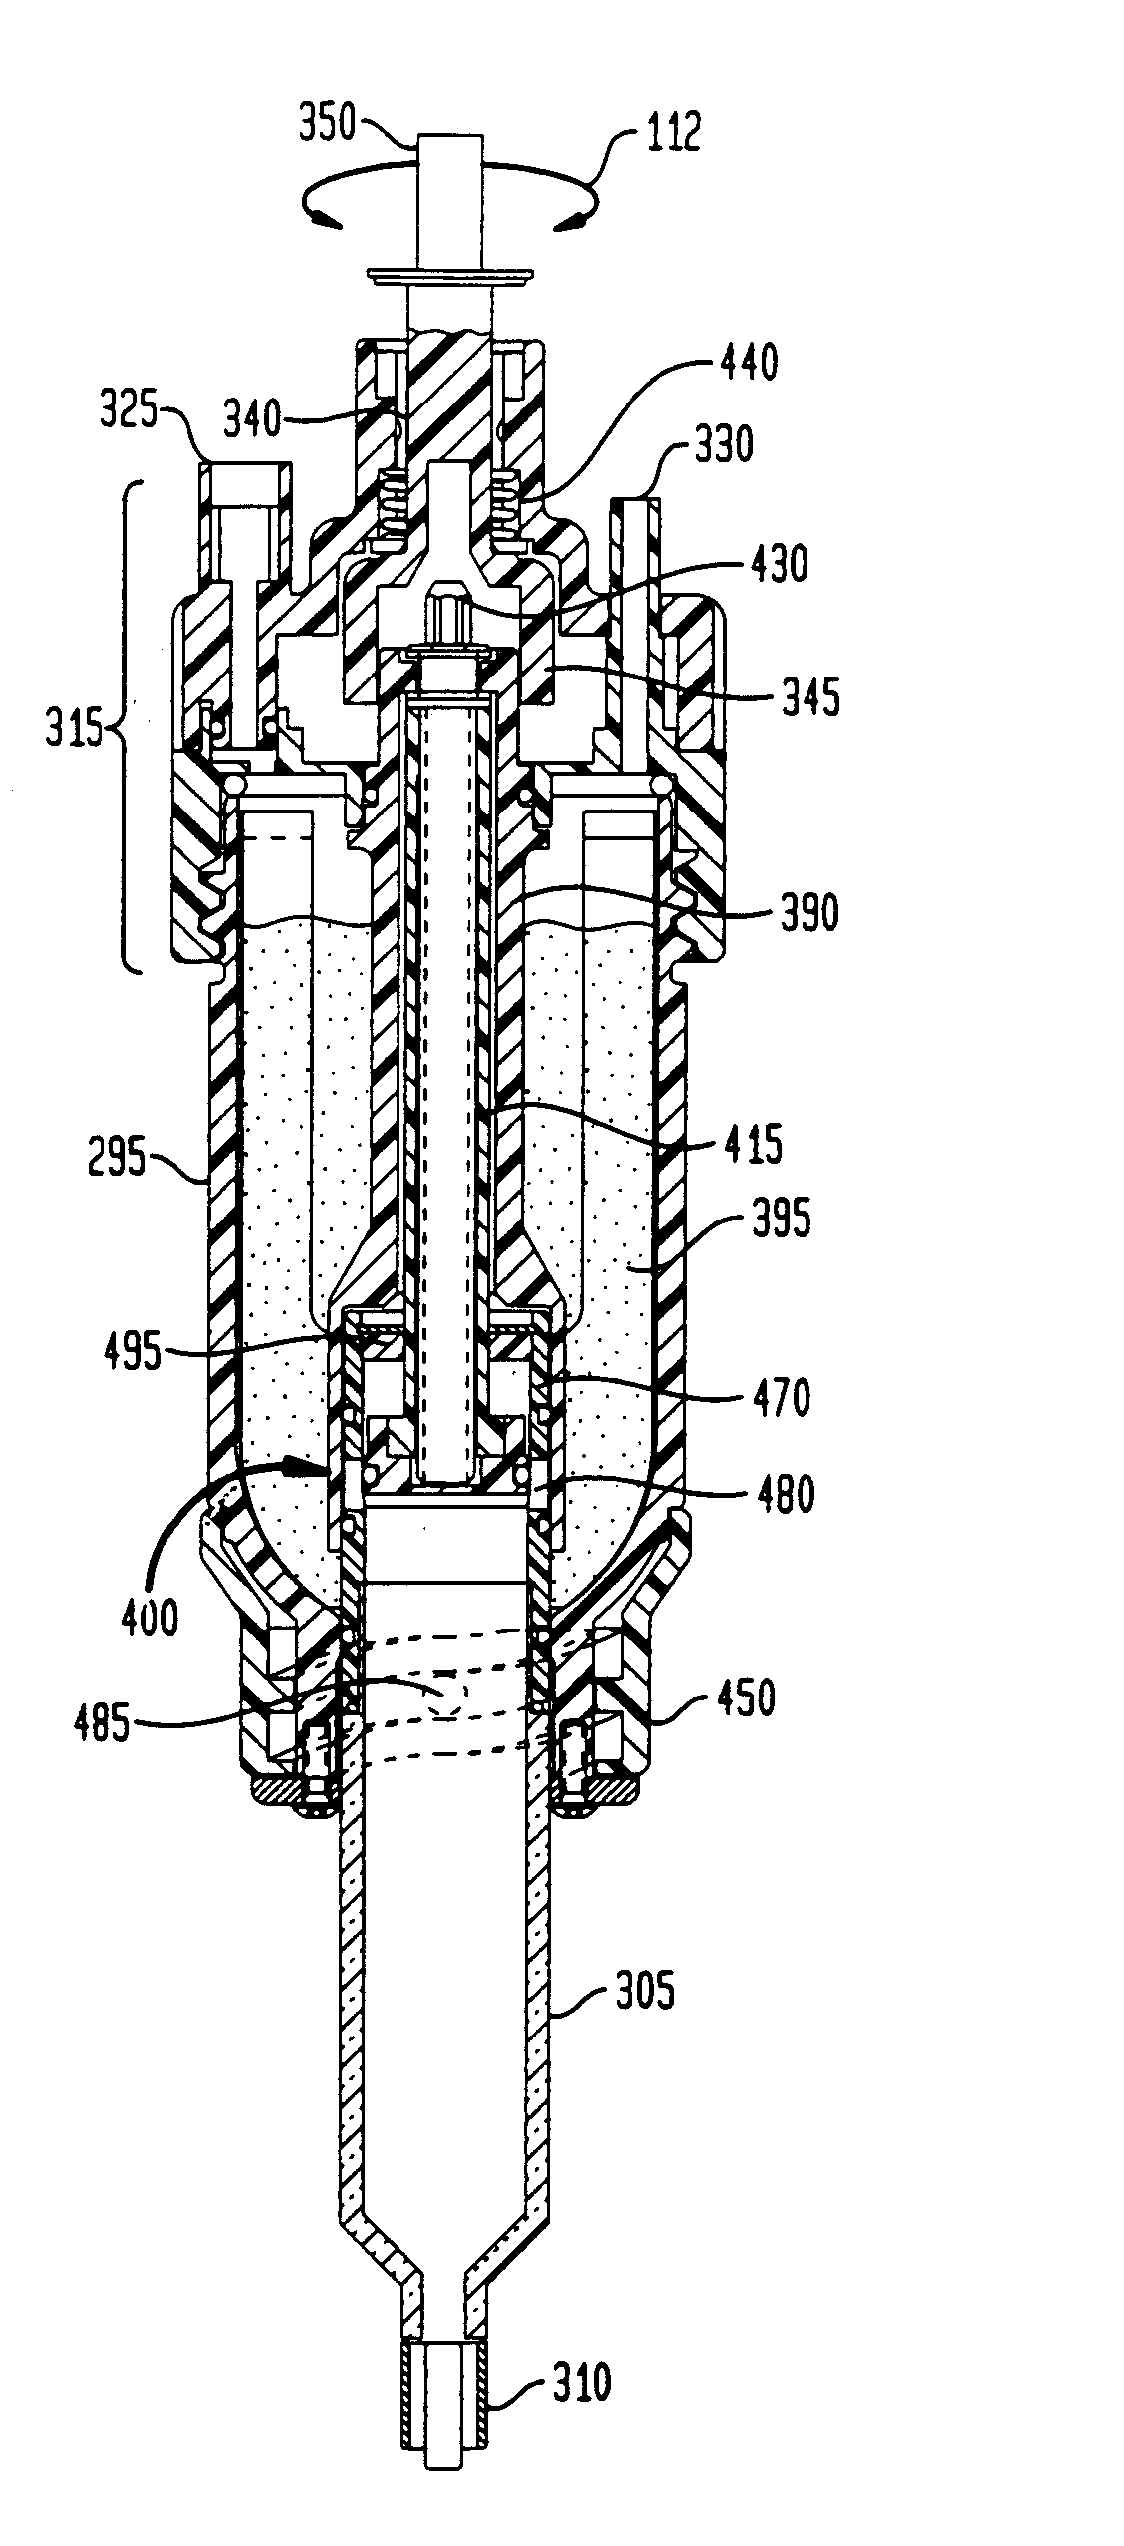 Apparatus for mixing and dispensing components